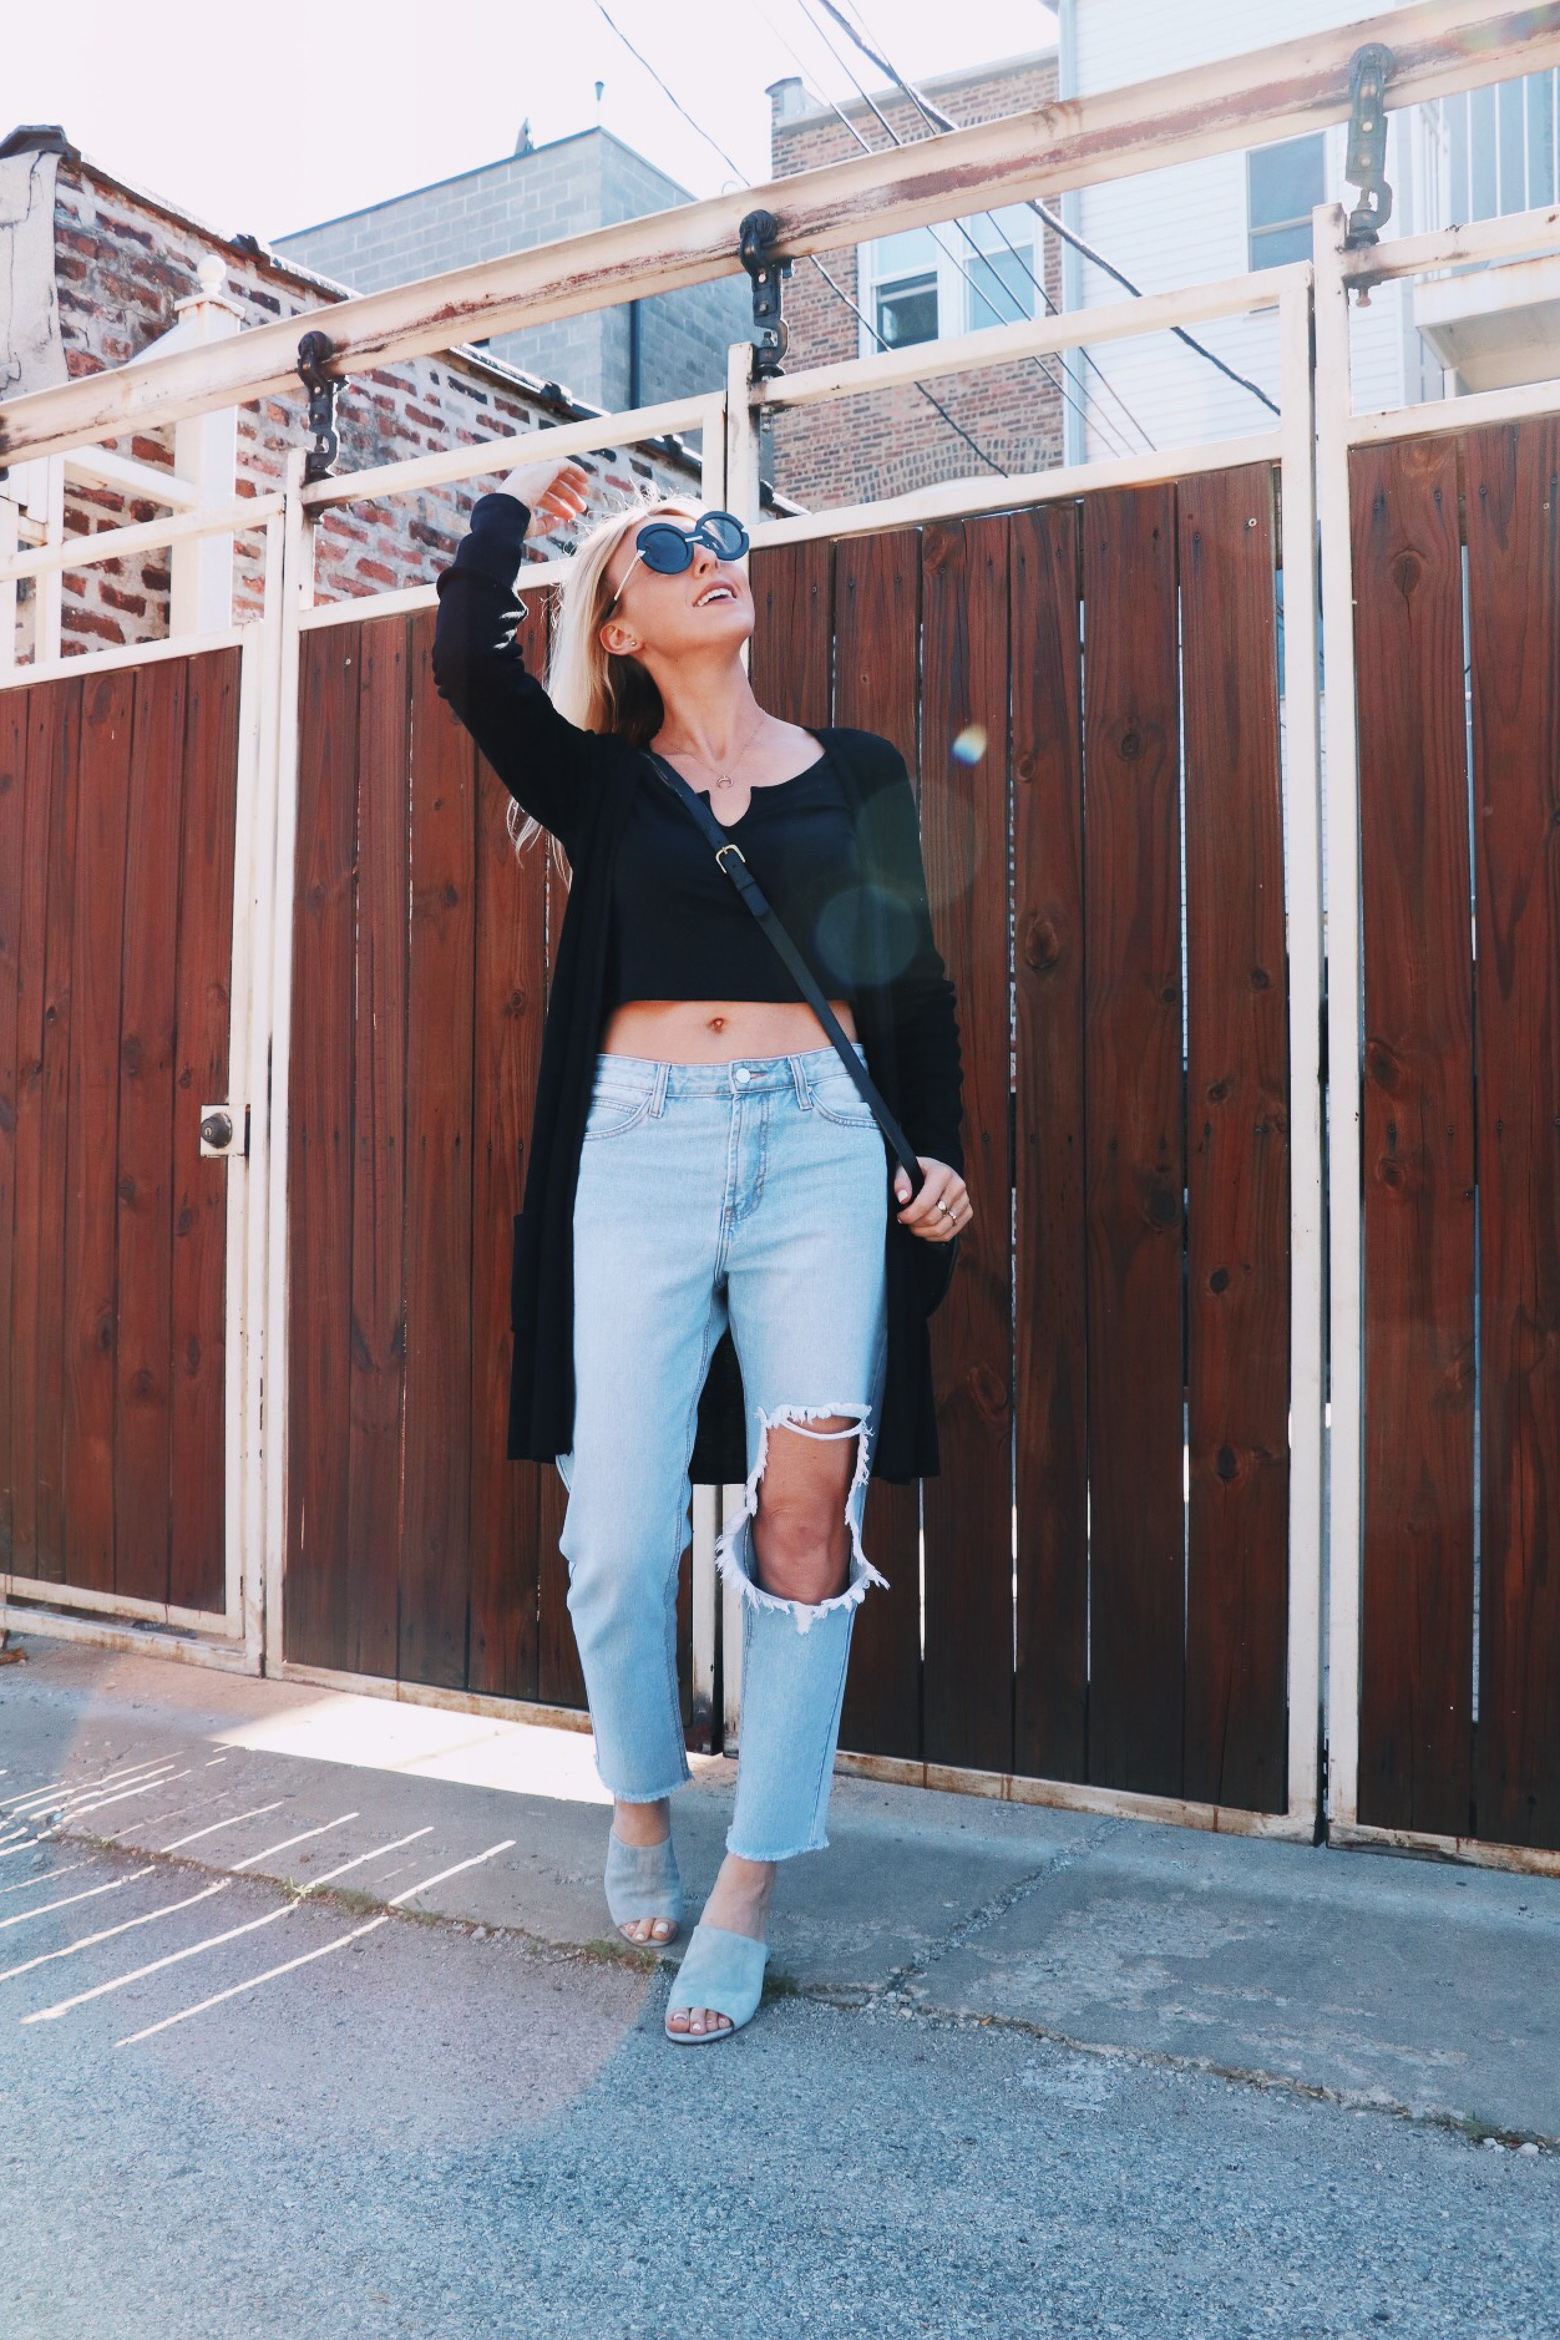 round up: cool jeans for your inner fashion girl – Meg McMillin